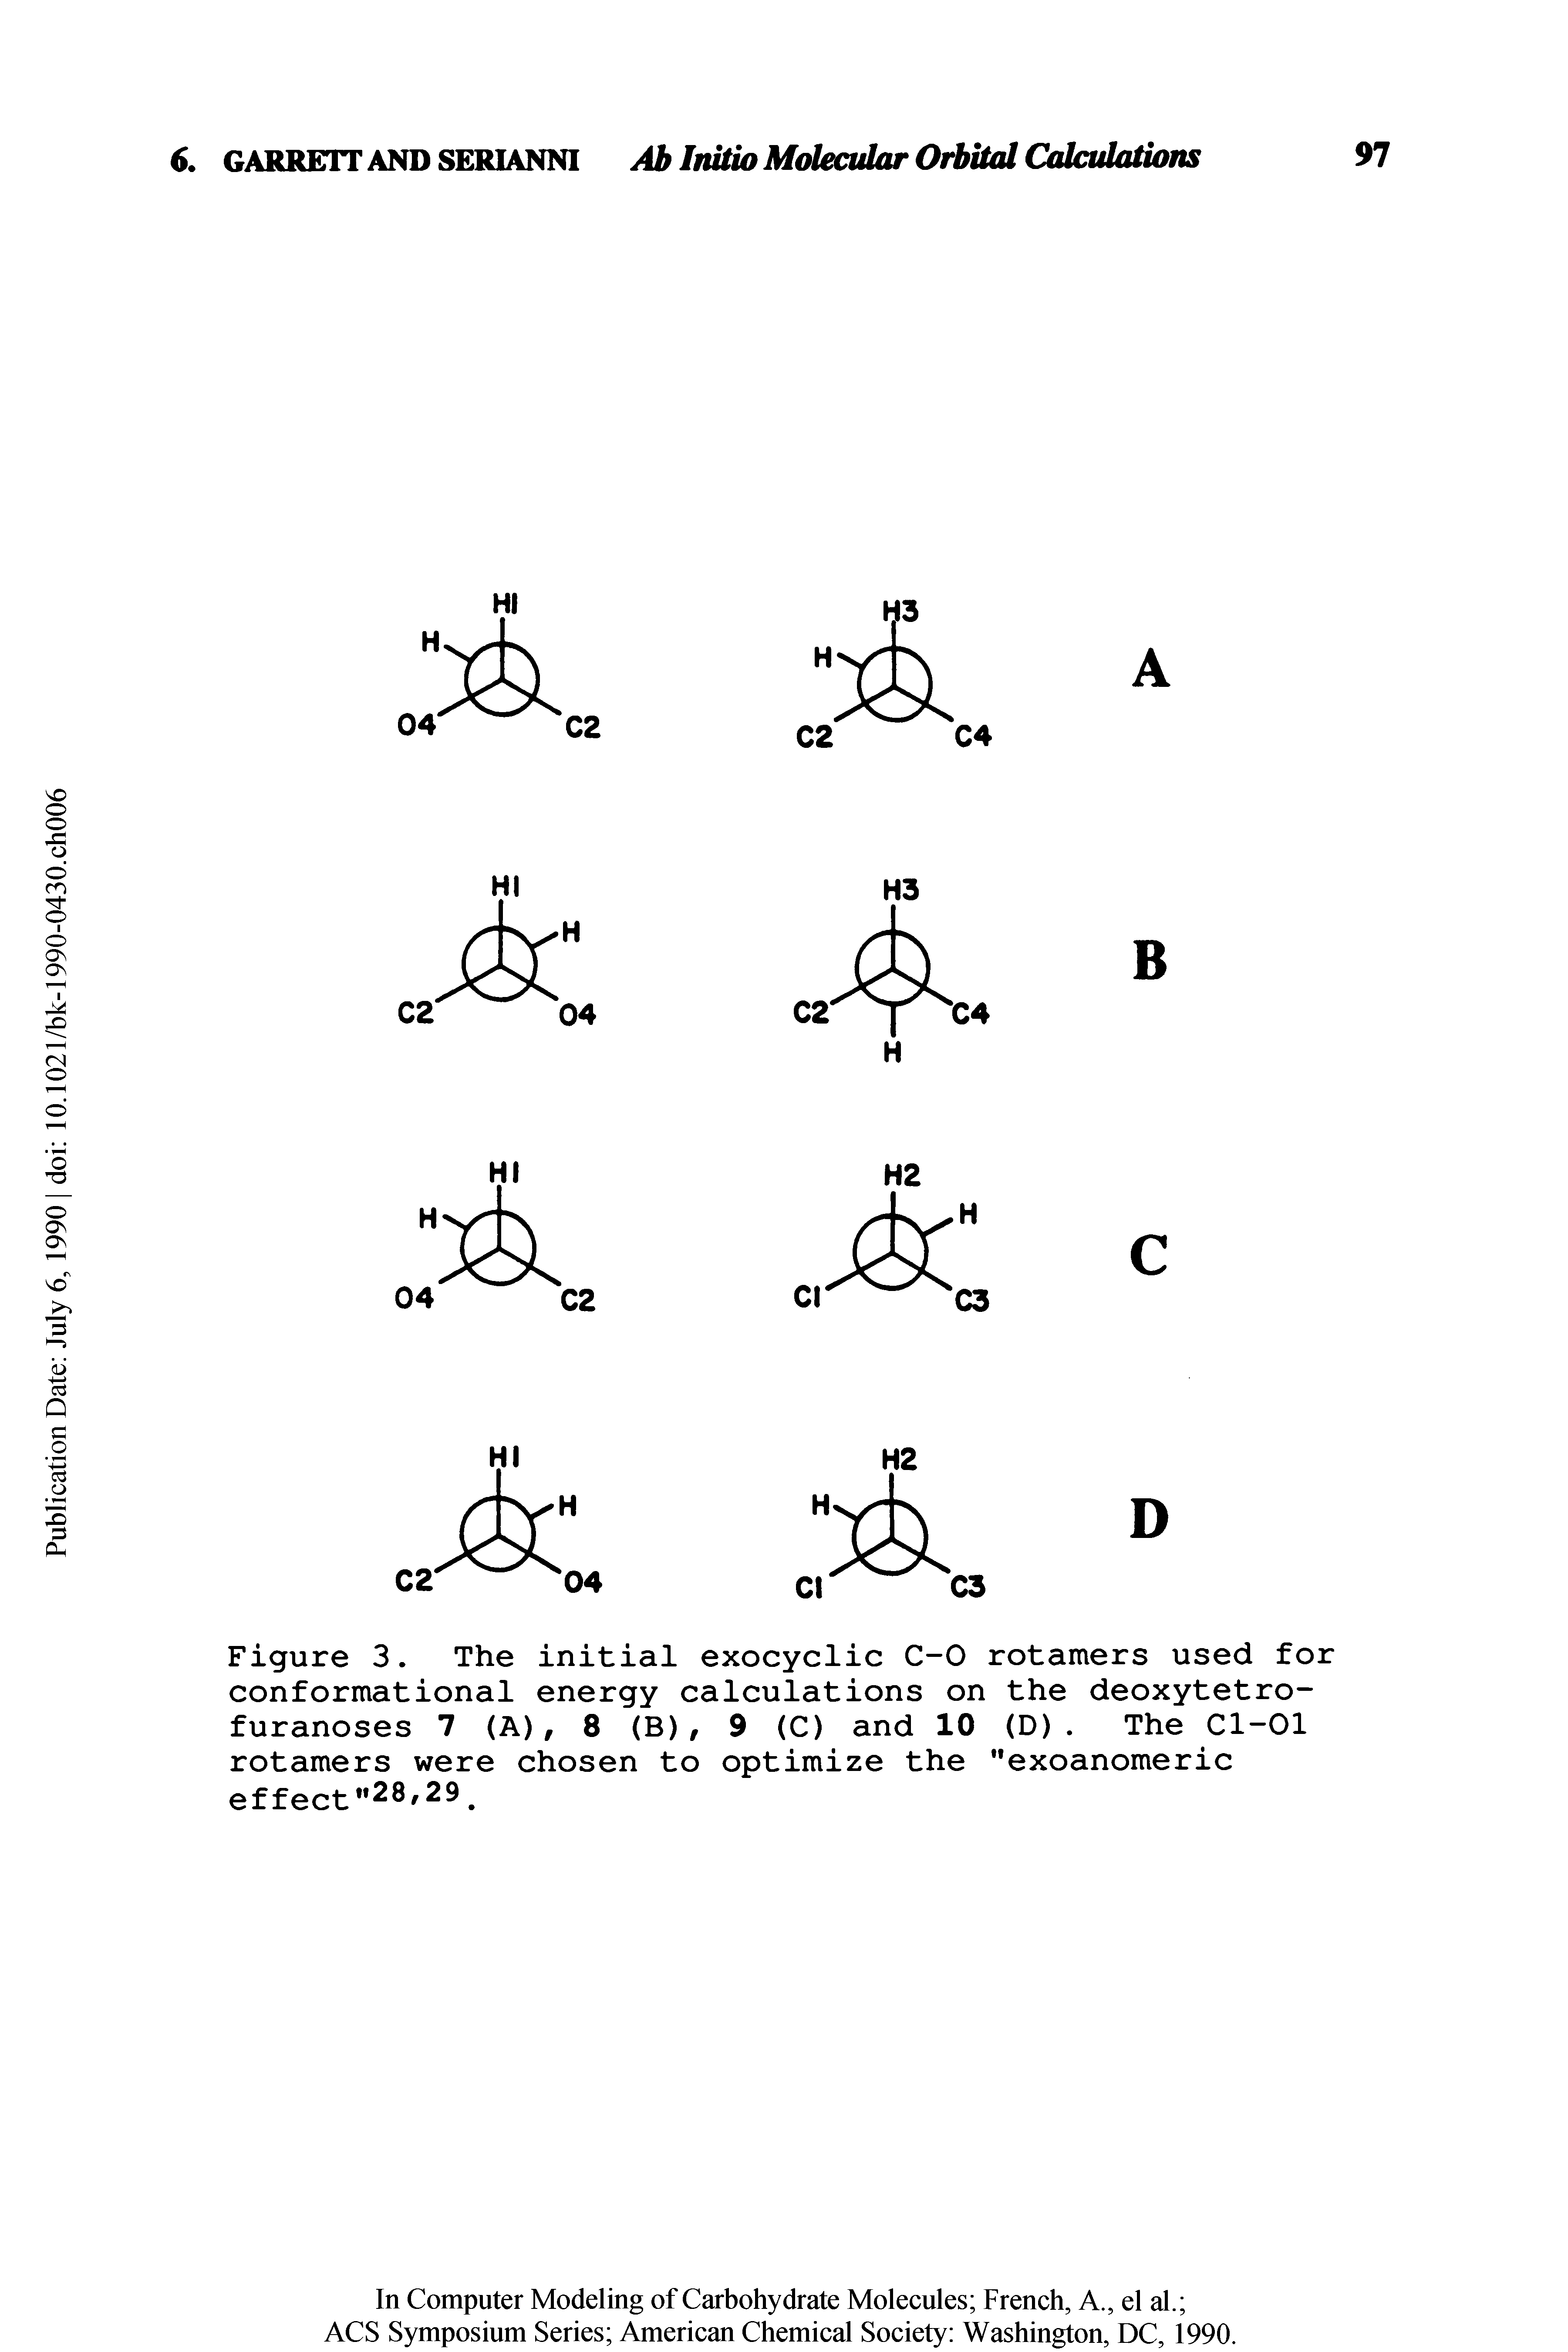 Figure 3. The initial exocyclic C-0 retainers used for conformational energy calculations on the deoxytetro-furanoses 7 (A), 8 (B), 9 (C) and 10 (D). The Cl-01 rotamers were chosen to optimize the "exoanomeric...